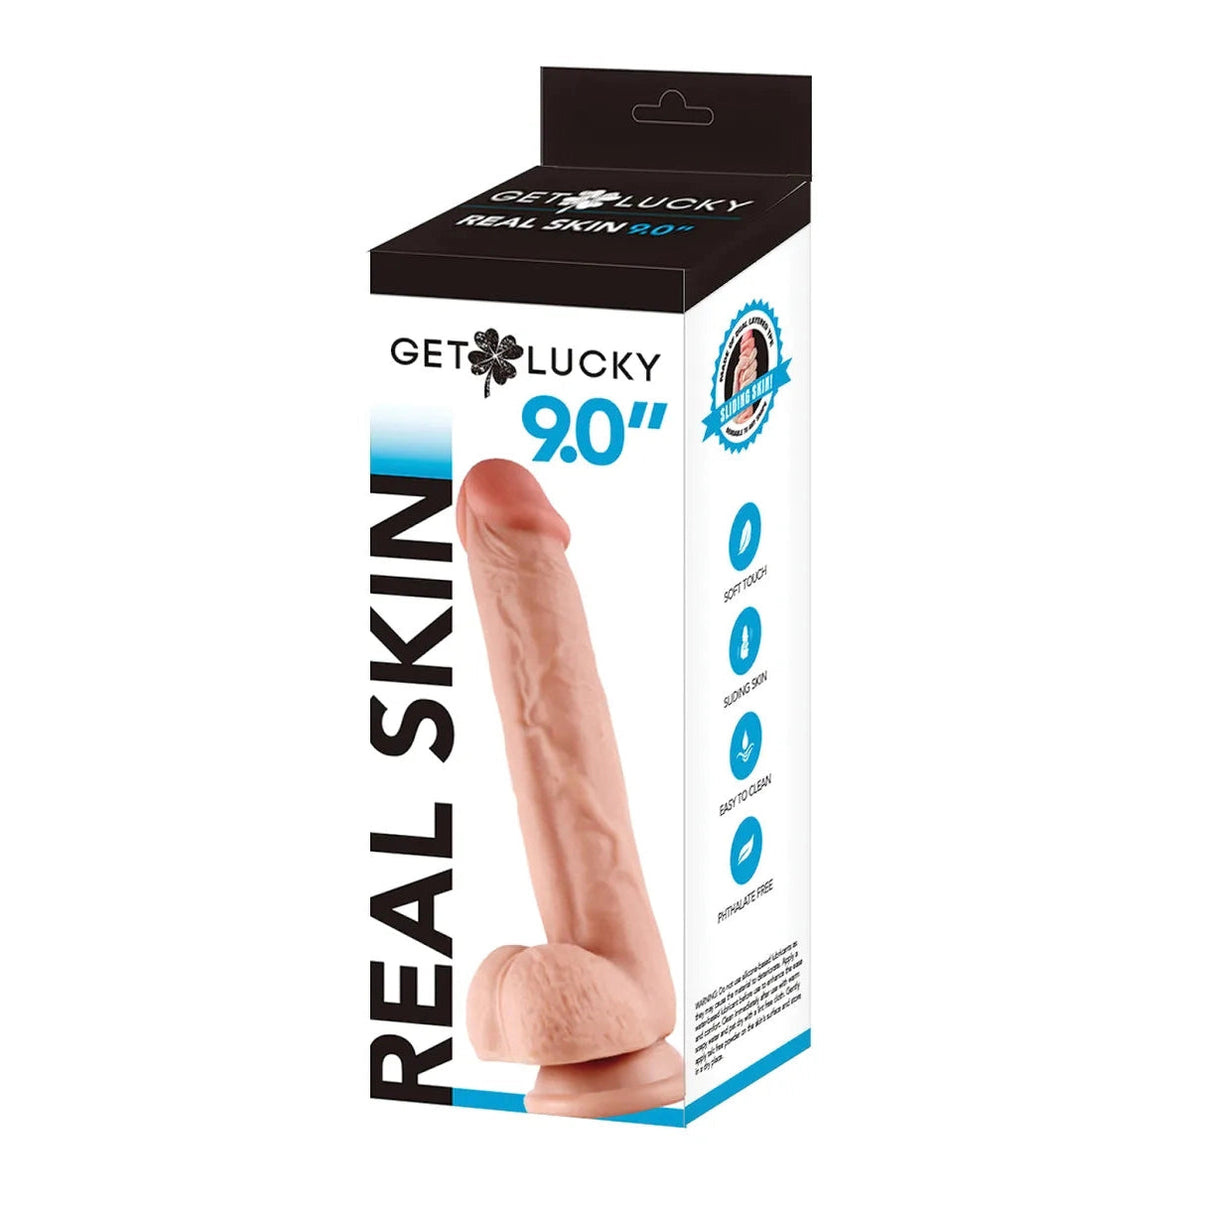 Get Lucky 9 Inch Real Skin Series